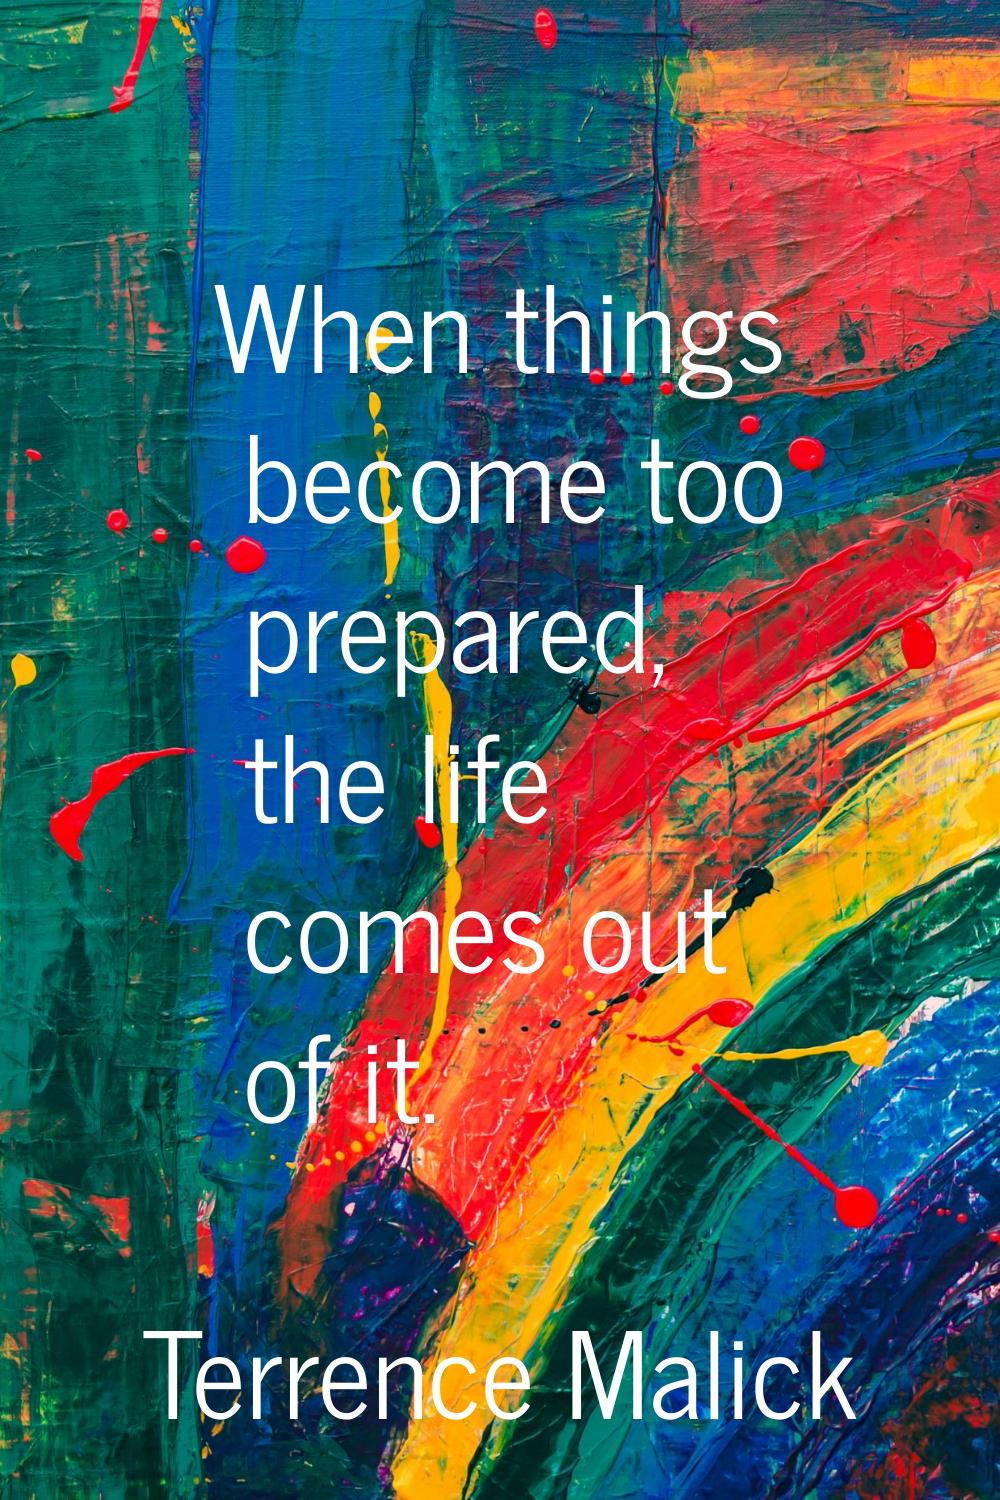 When things become too prepared, the life comes out of it.